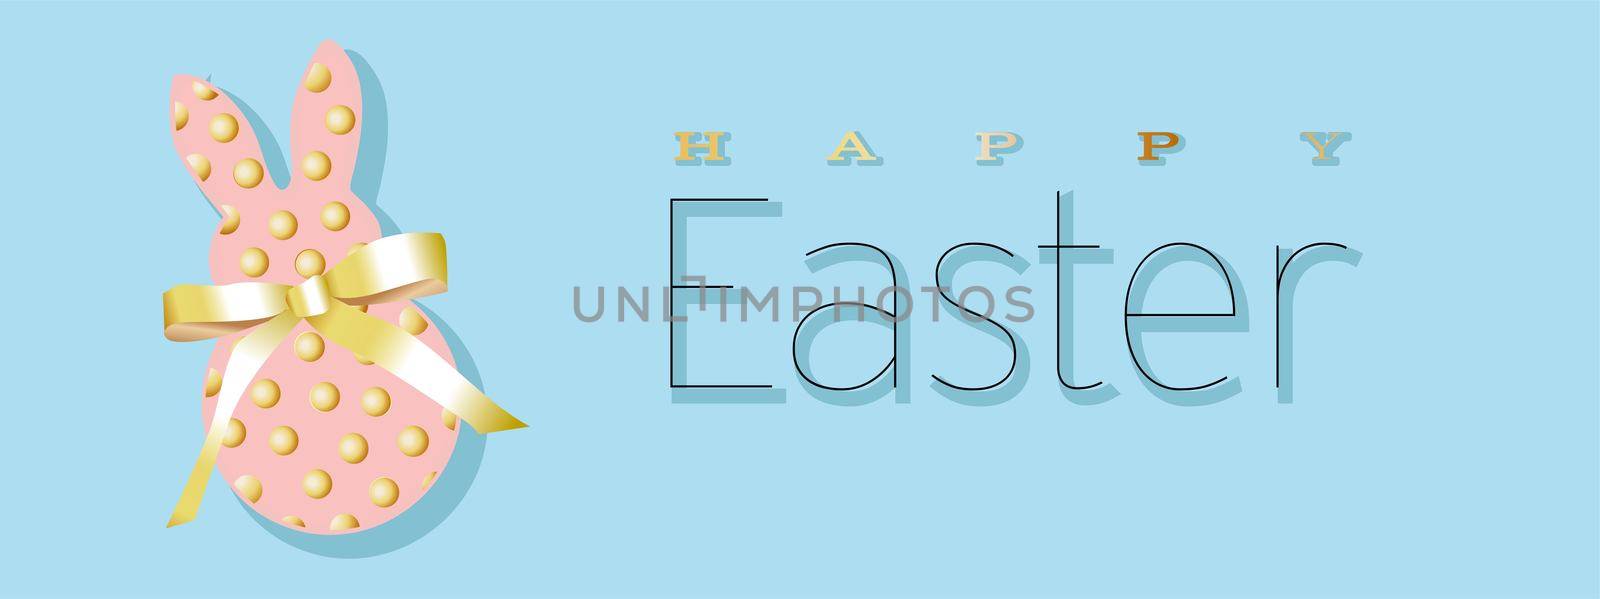 Easter banner. Horizontal poster, postcard, website headers, background with text happy easter. Bunny rabbit with a bow from a gold ribbon on a blue background. Elegant Design with realistic objects. by annatarankova